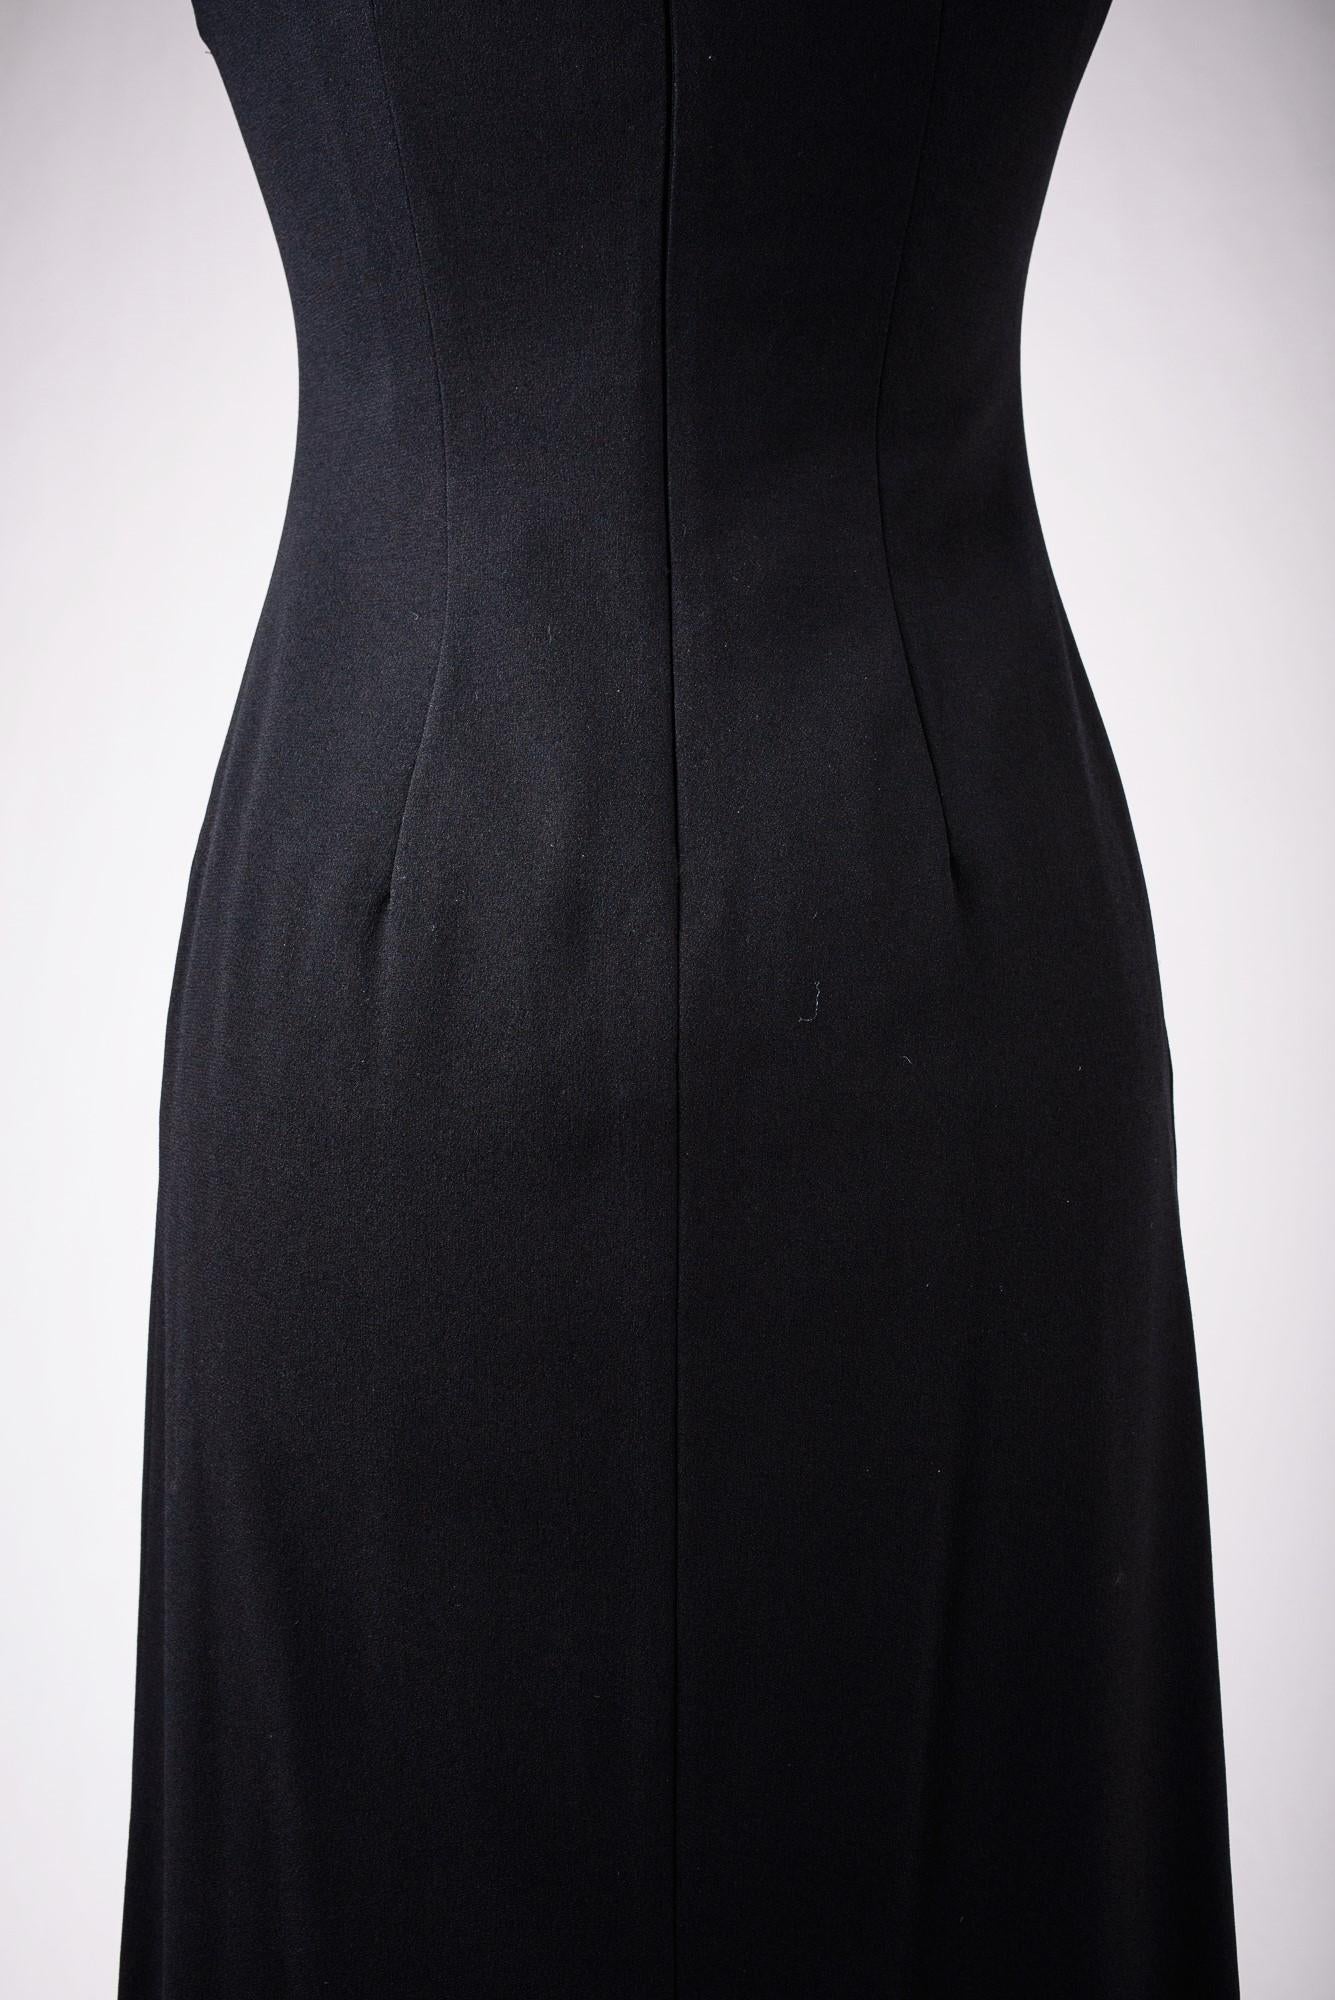 A Long Evening Black Dress by Claude Montana - French Circa 1999 For Sale 9